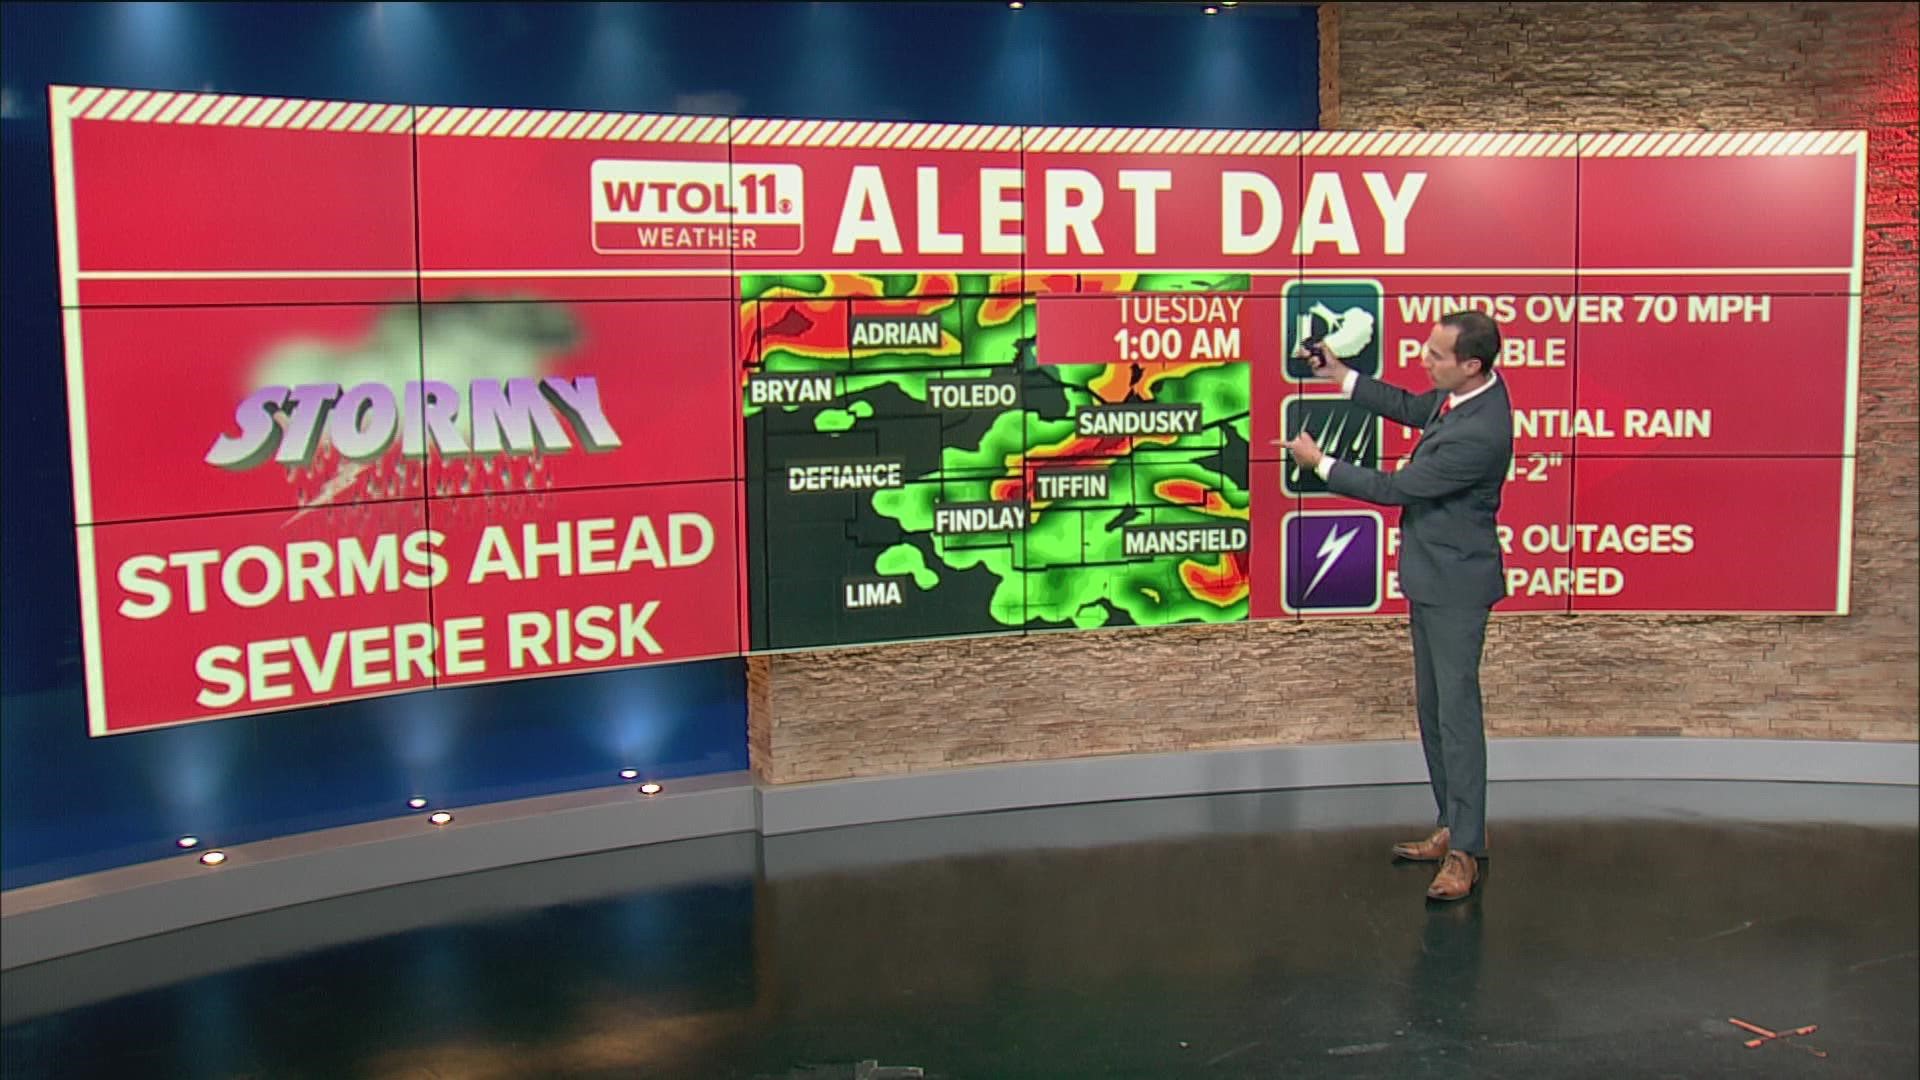 ALERT DAY weather brings the potential for severe thunderstorms, heavy winds and potential flooding Monday night.